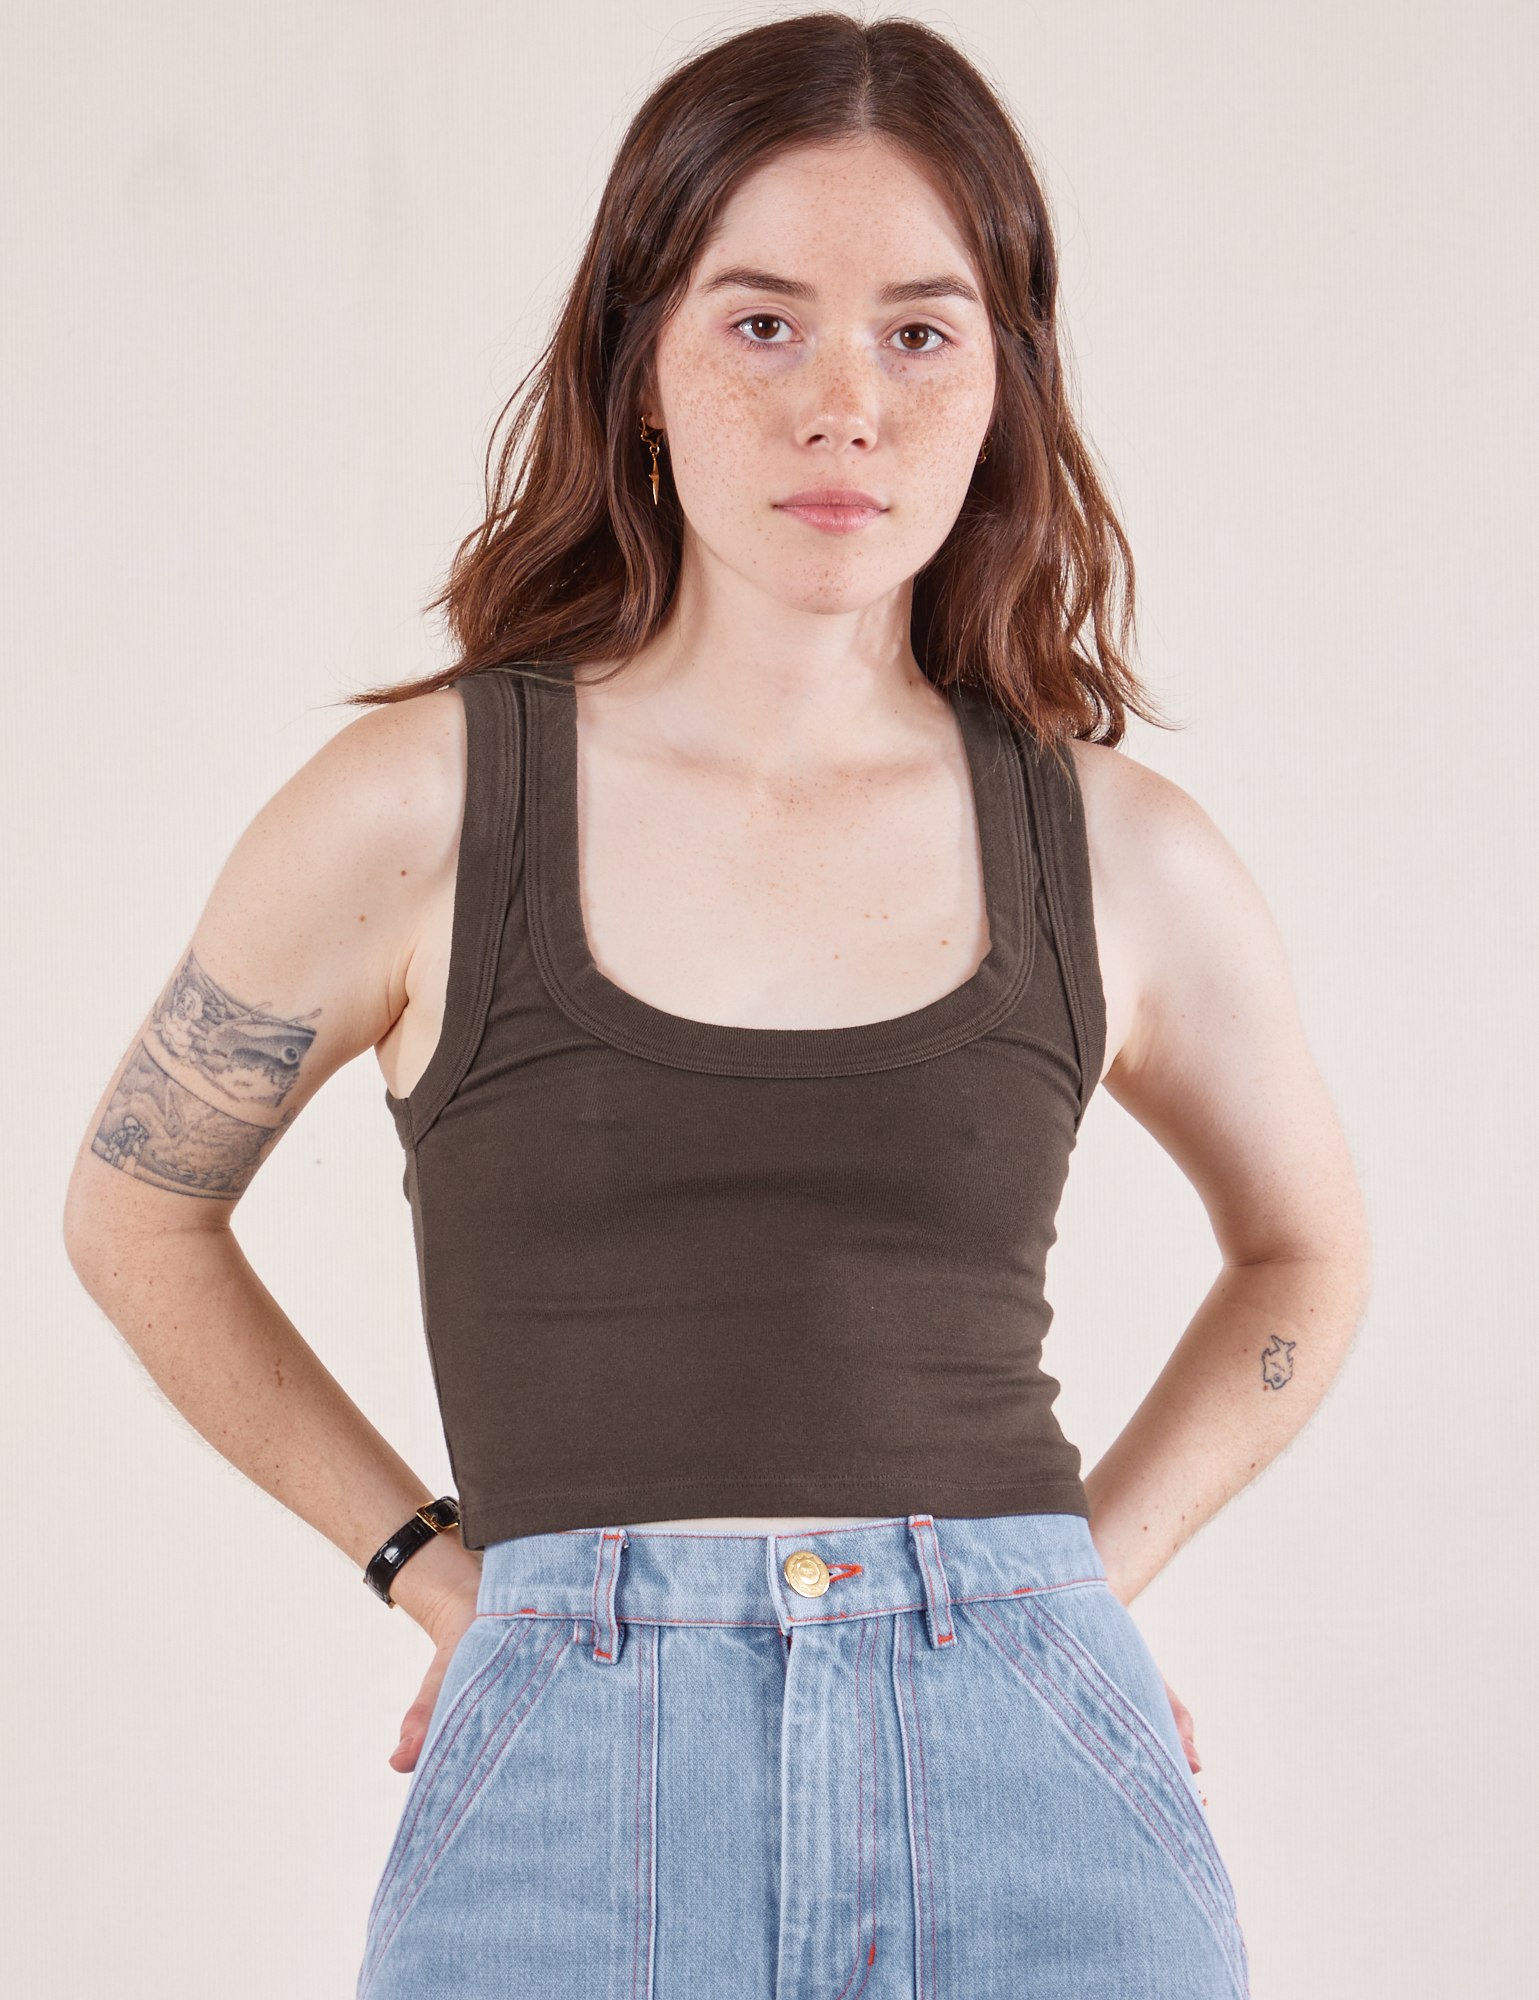 Hana is 5&#39;3&quot; and wearing P Cropped Tank Top in Espresso Brown